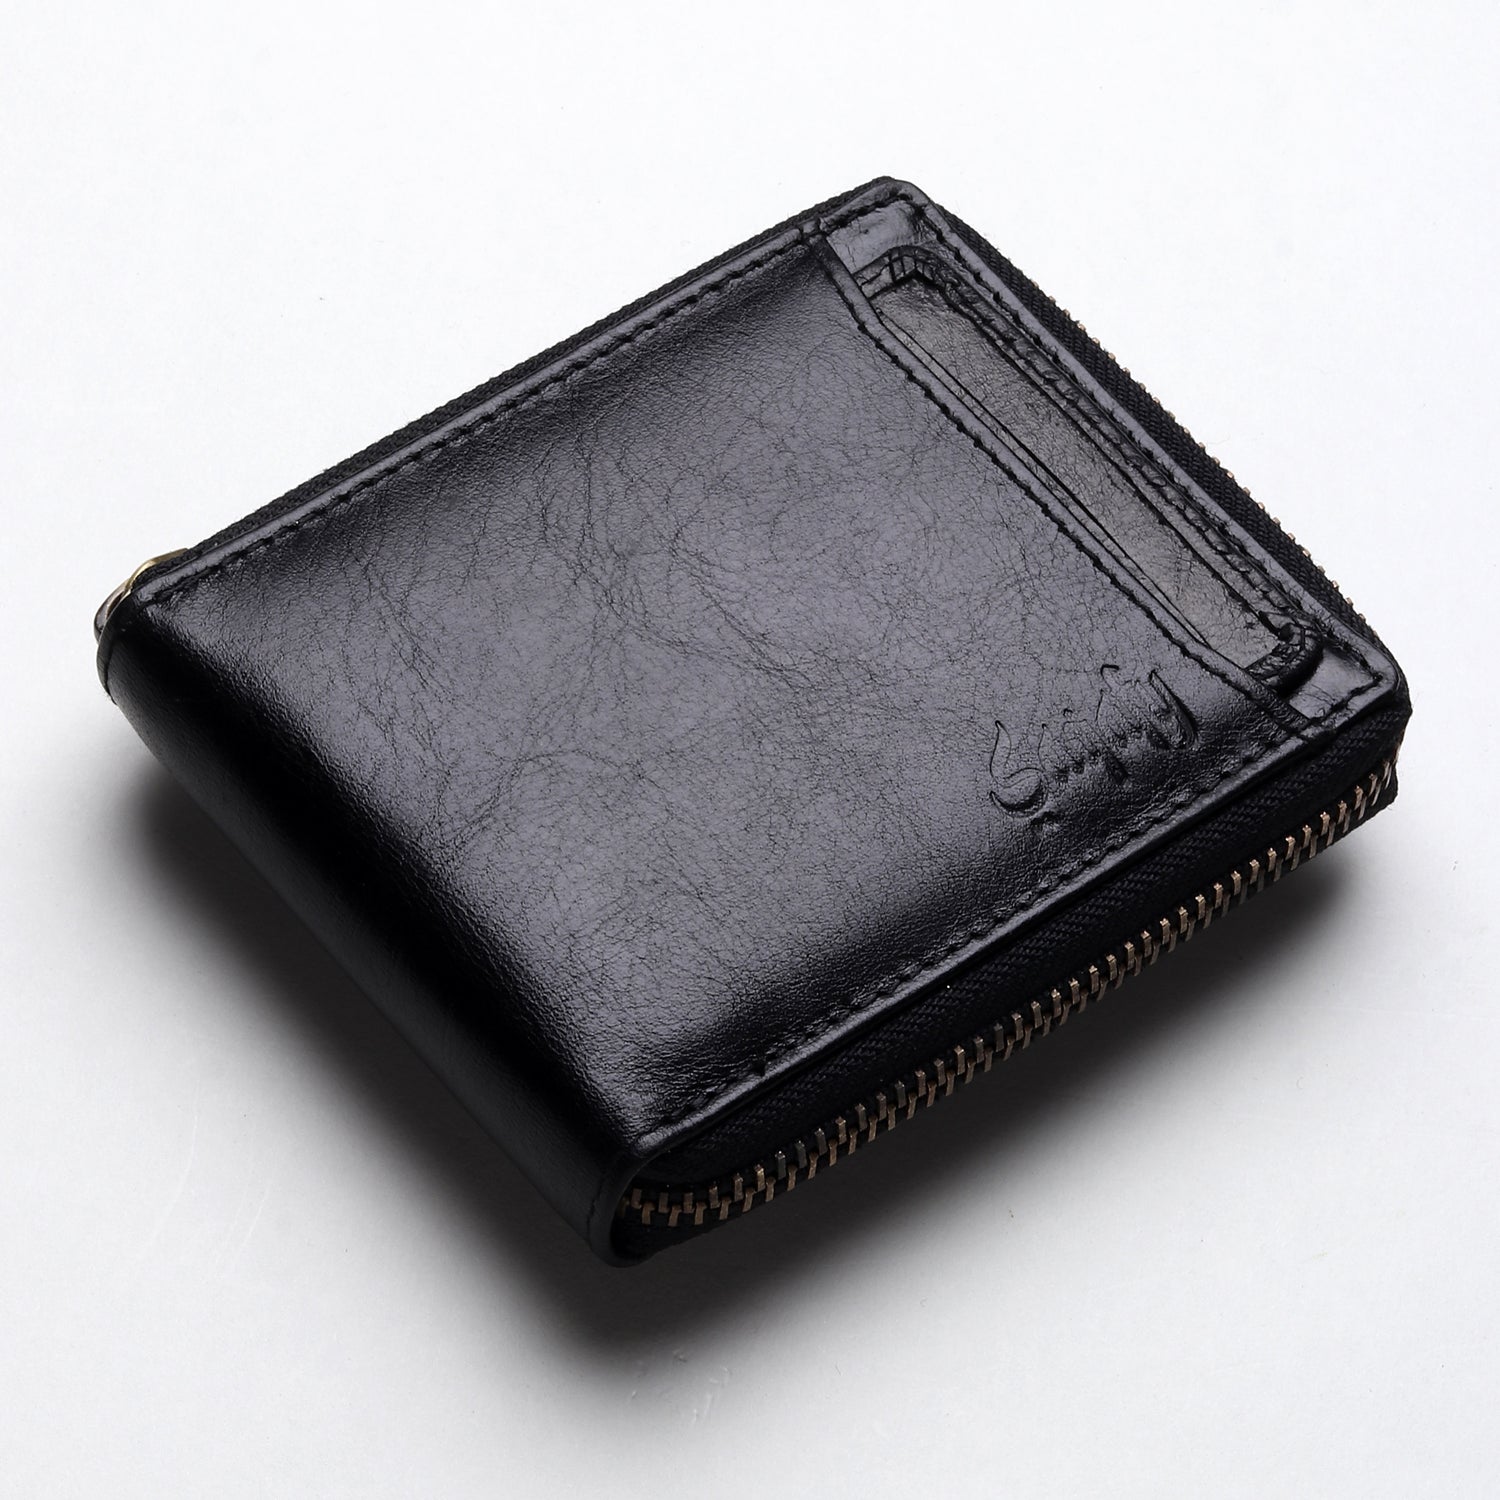 Saqafy Leather Men's Wallet - Faztroo